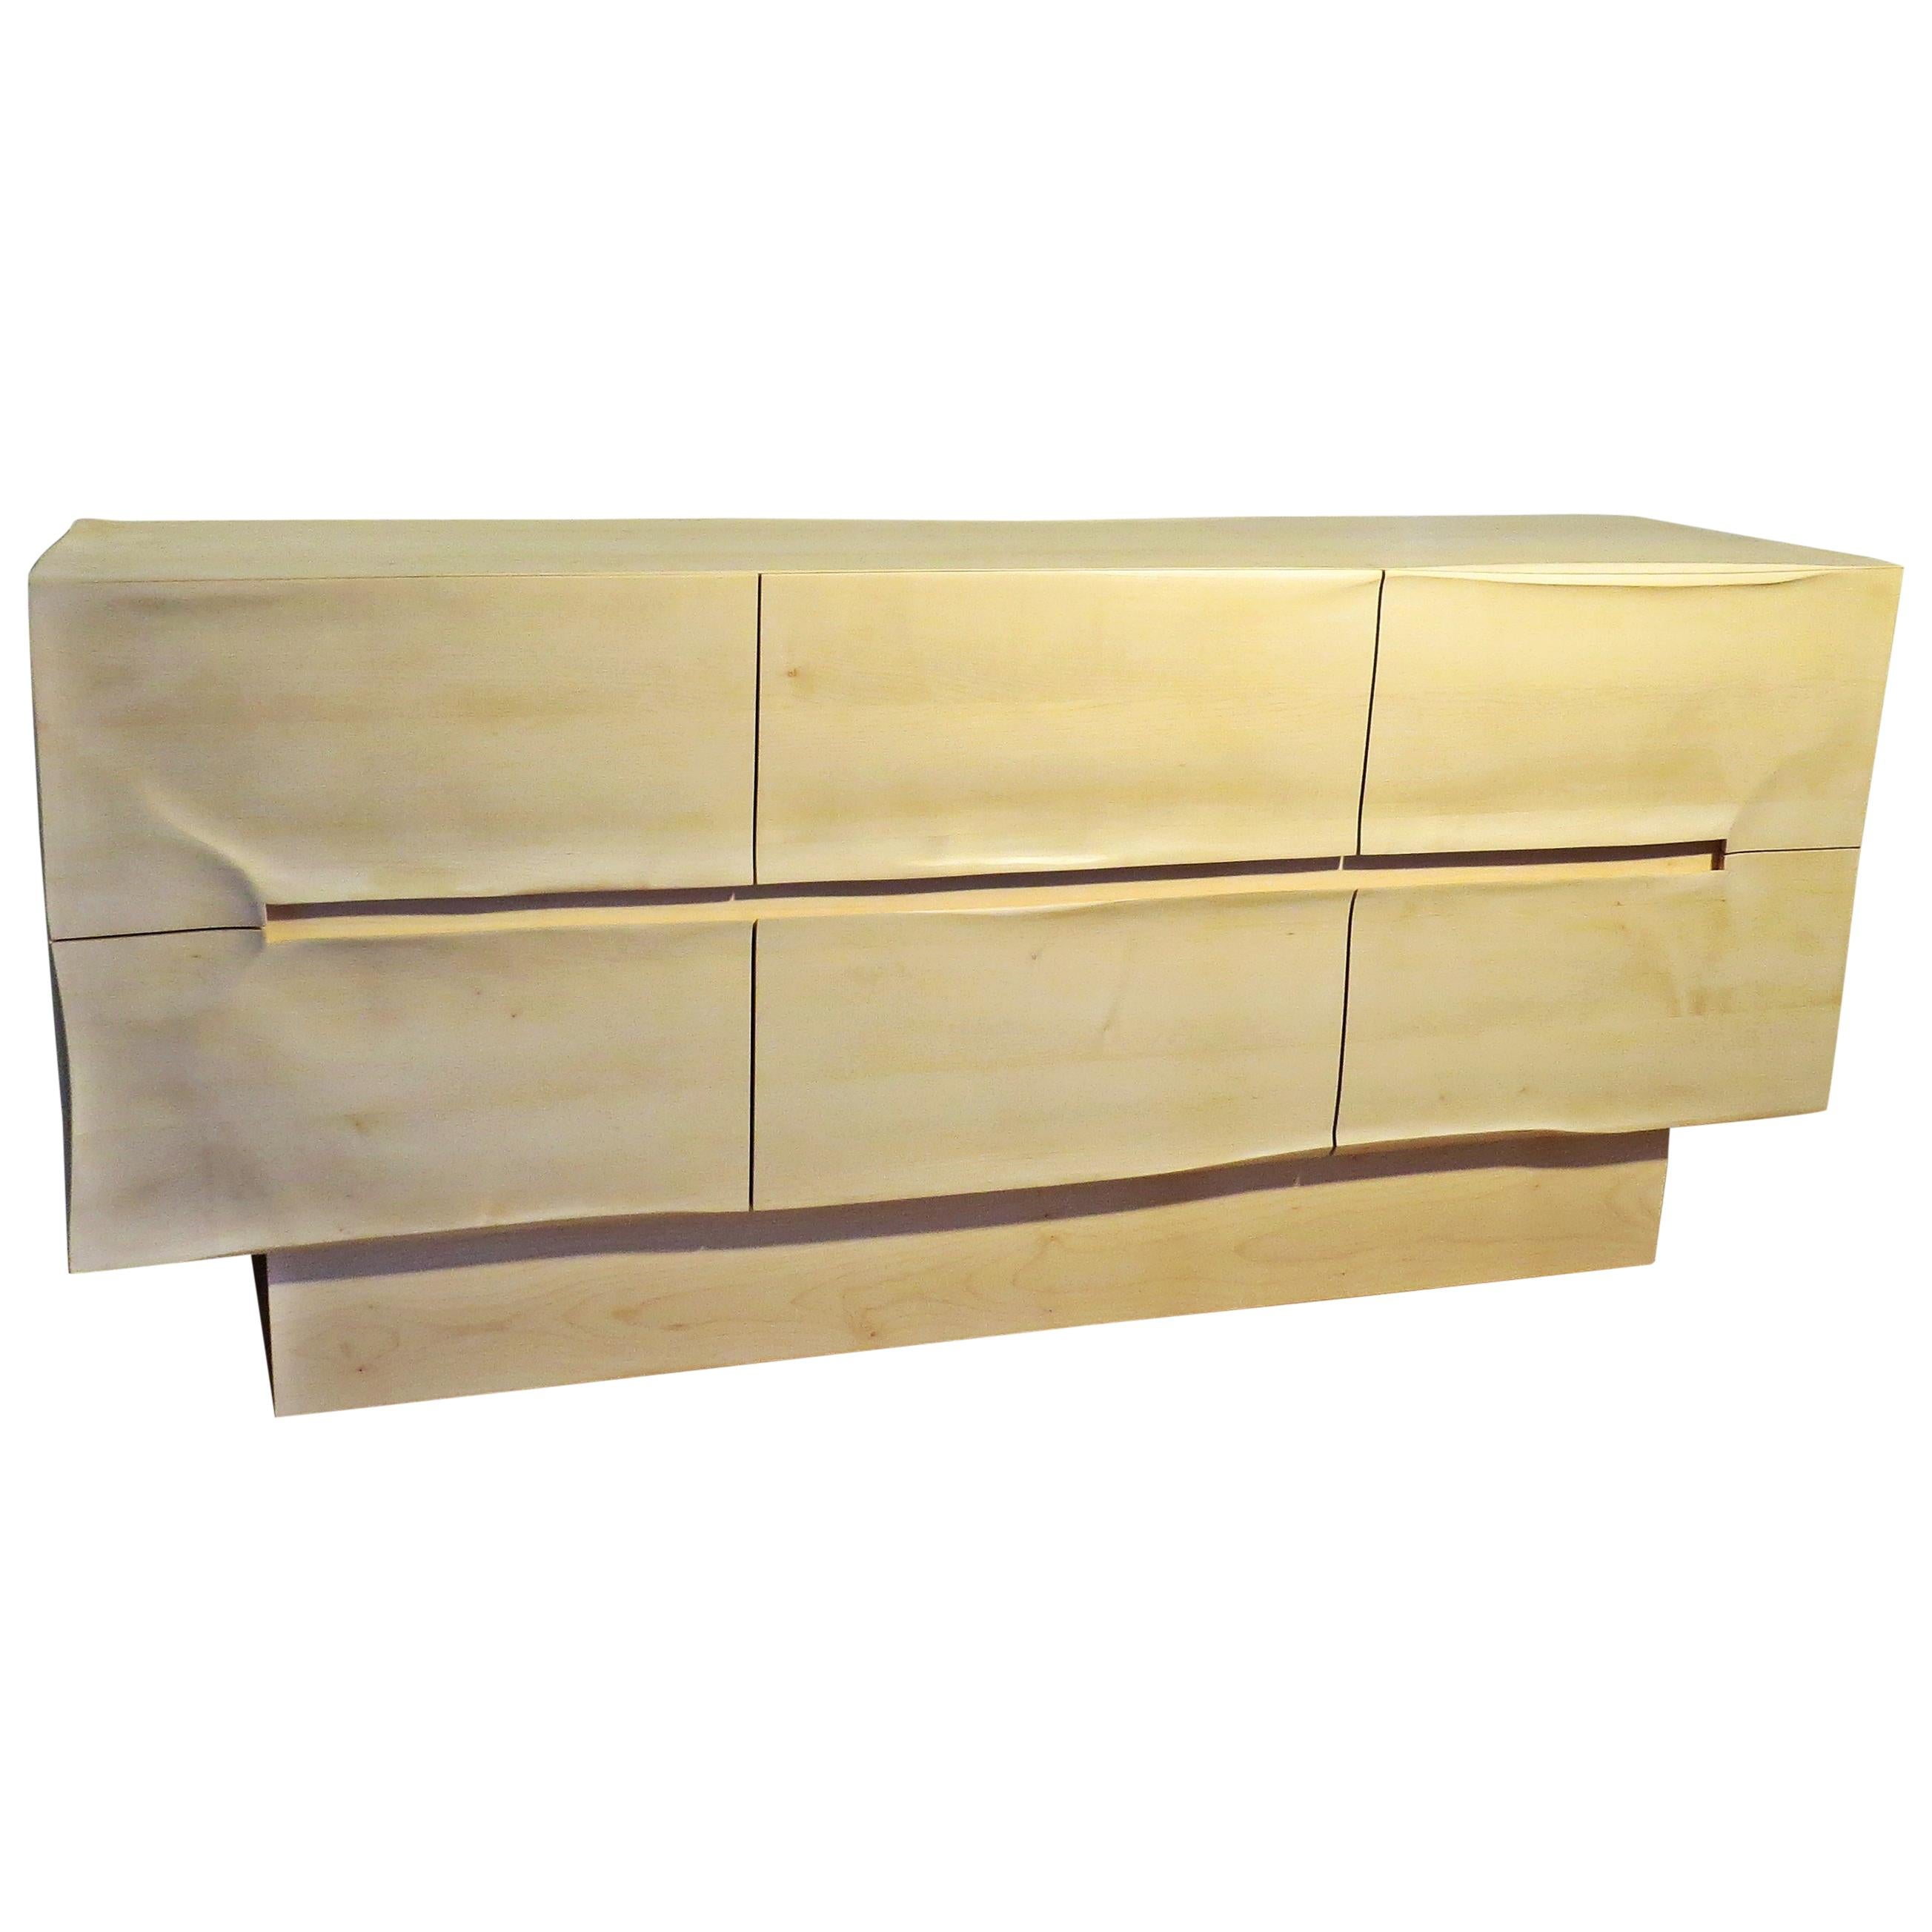 Sideboard Solid Wood in Organic Design, Handcrafted in Germany, sculptural 